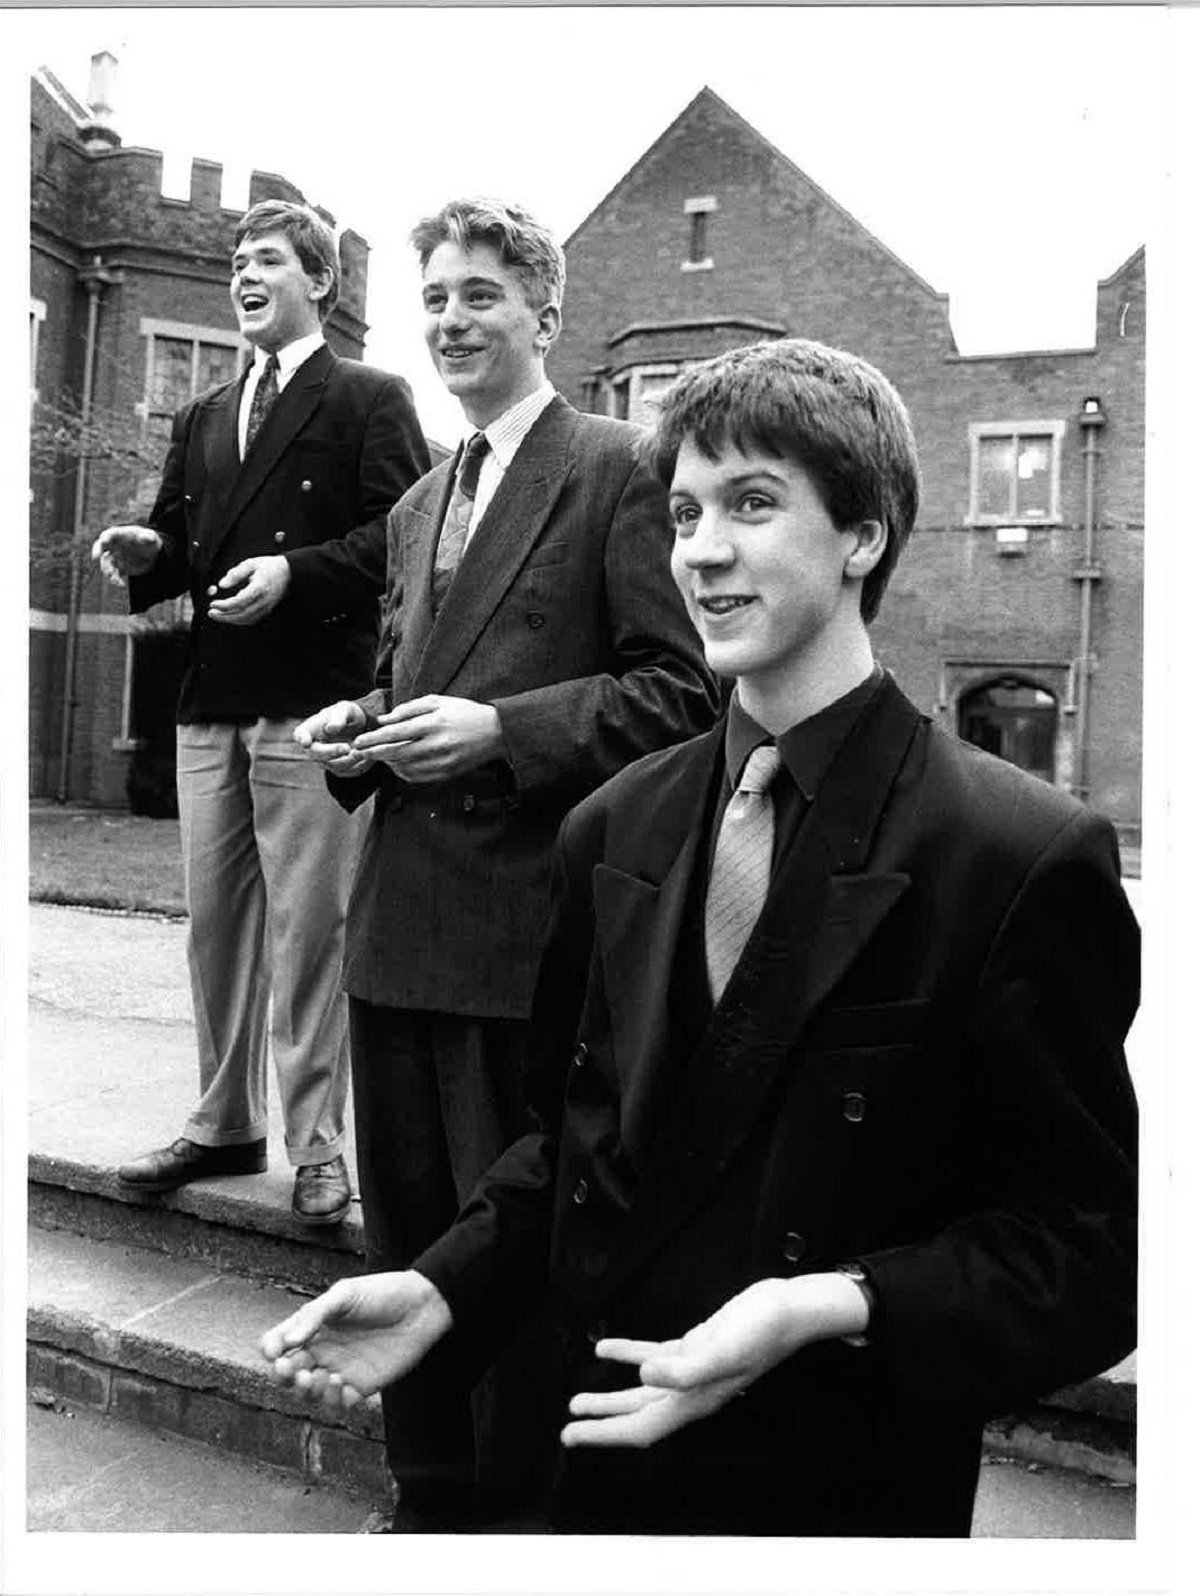 Making their point - pictured from left are David Welch, Ben Clasper and Ian Bird, who reached the final of a public speaking competition in March 1992